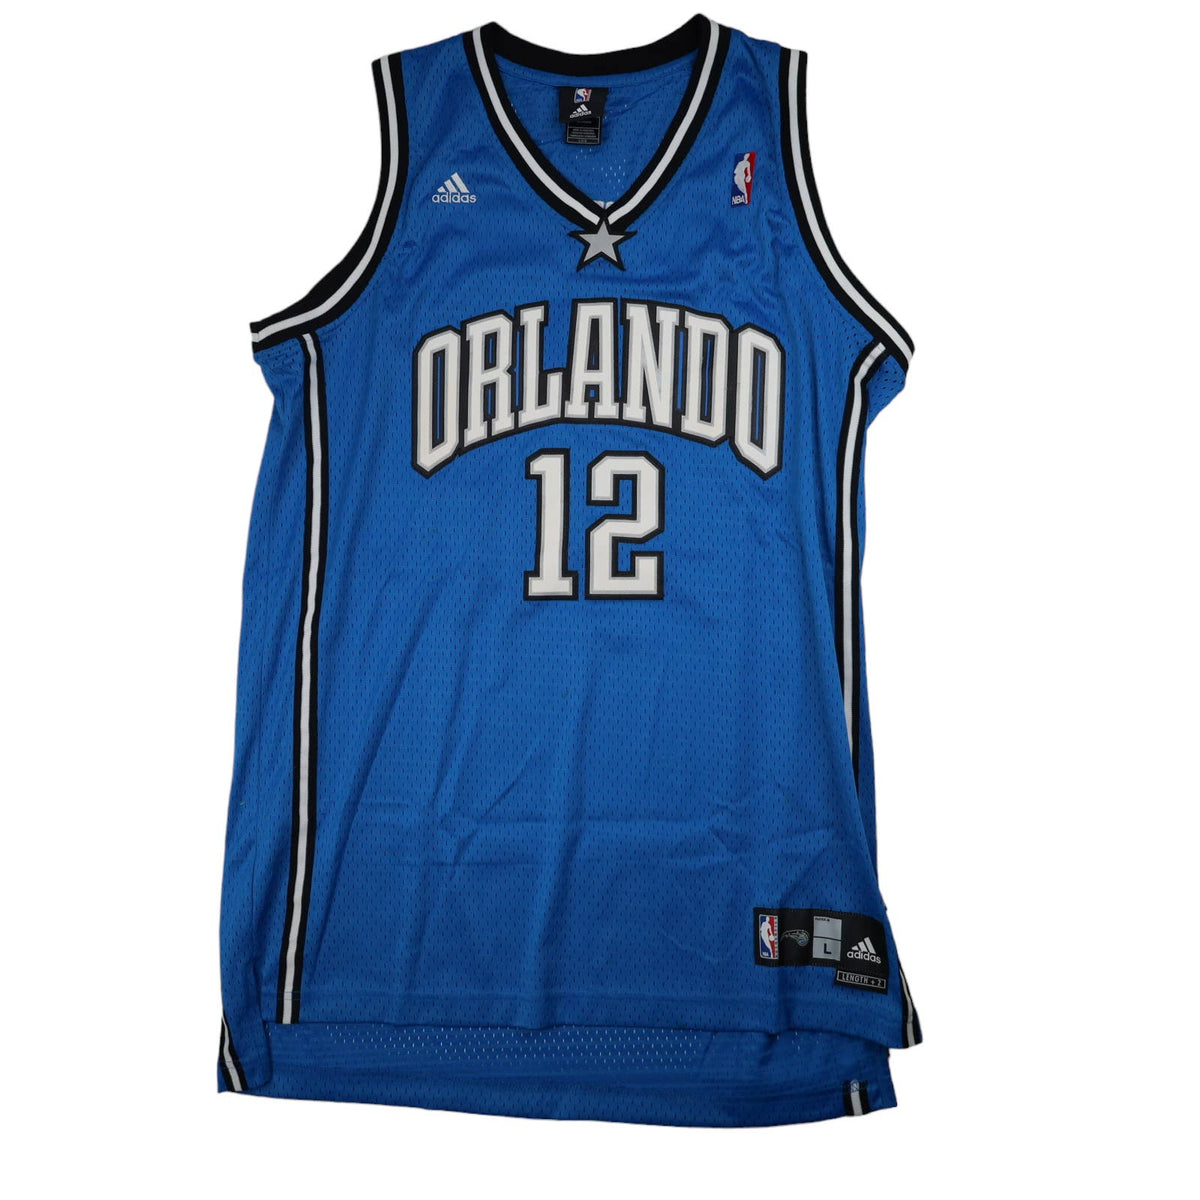 Dwight Howard Signed Authentic Reebok Orlando Magic Game Jersey